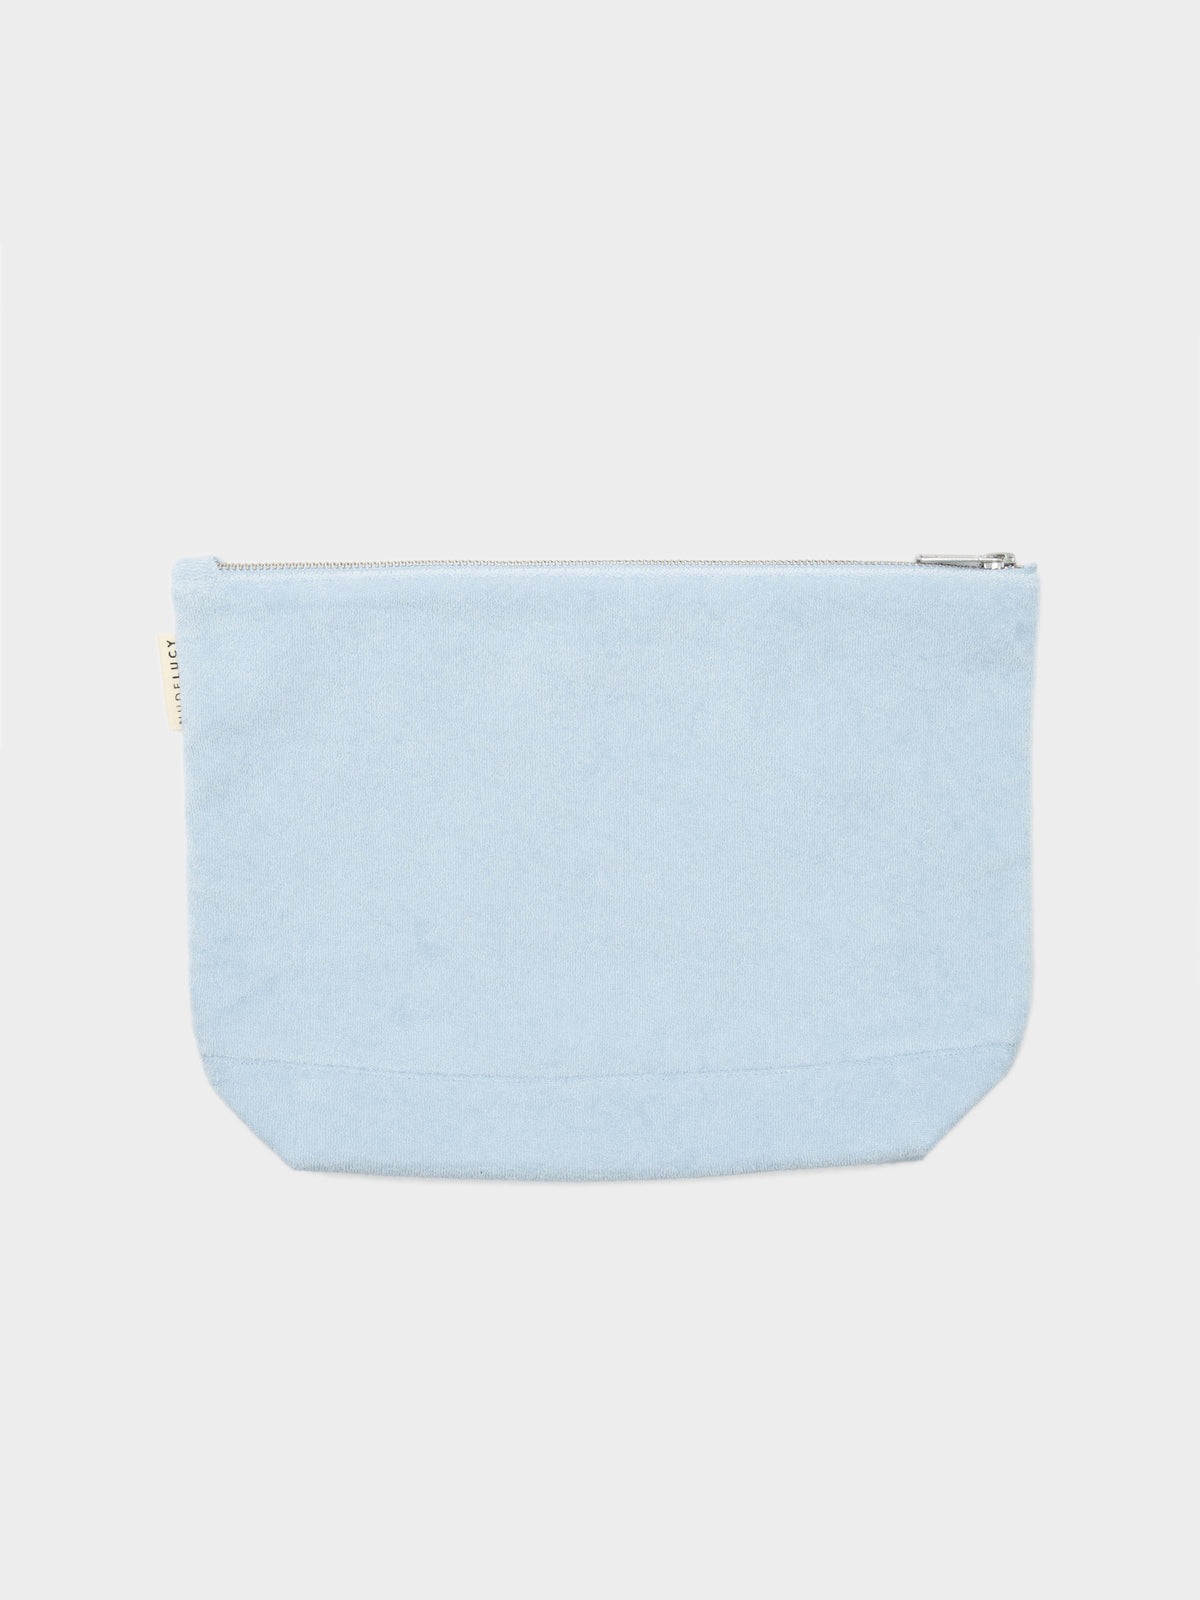 Terry Cosmetics Pouch in Sky